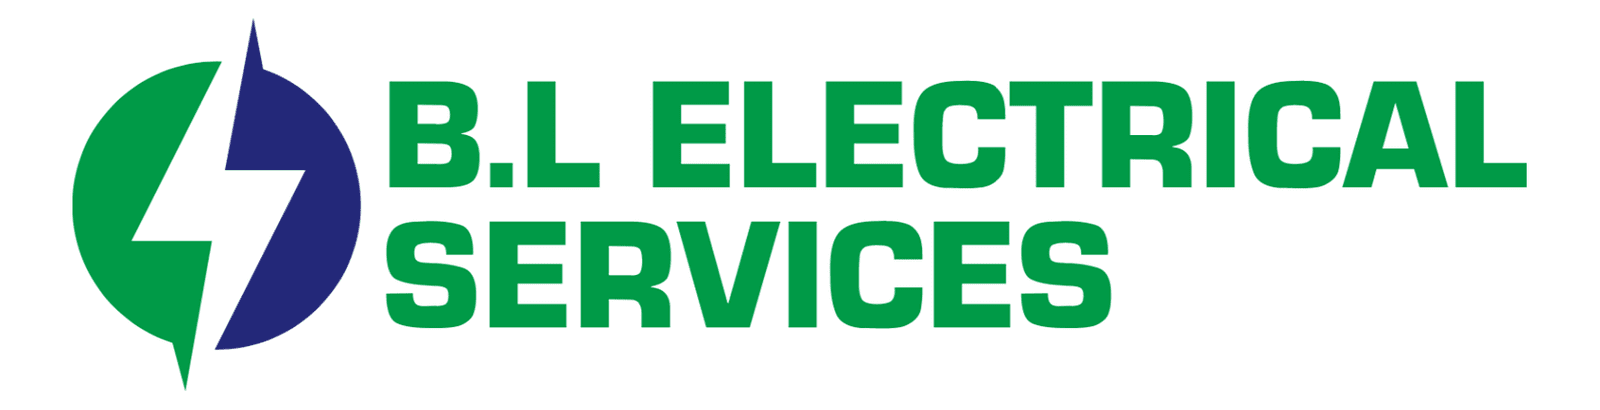 BL Electrical Services | Industrial, Commercial, Residential